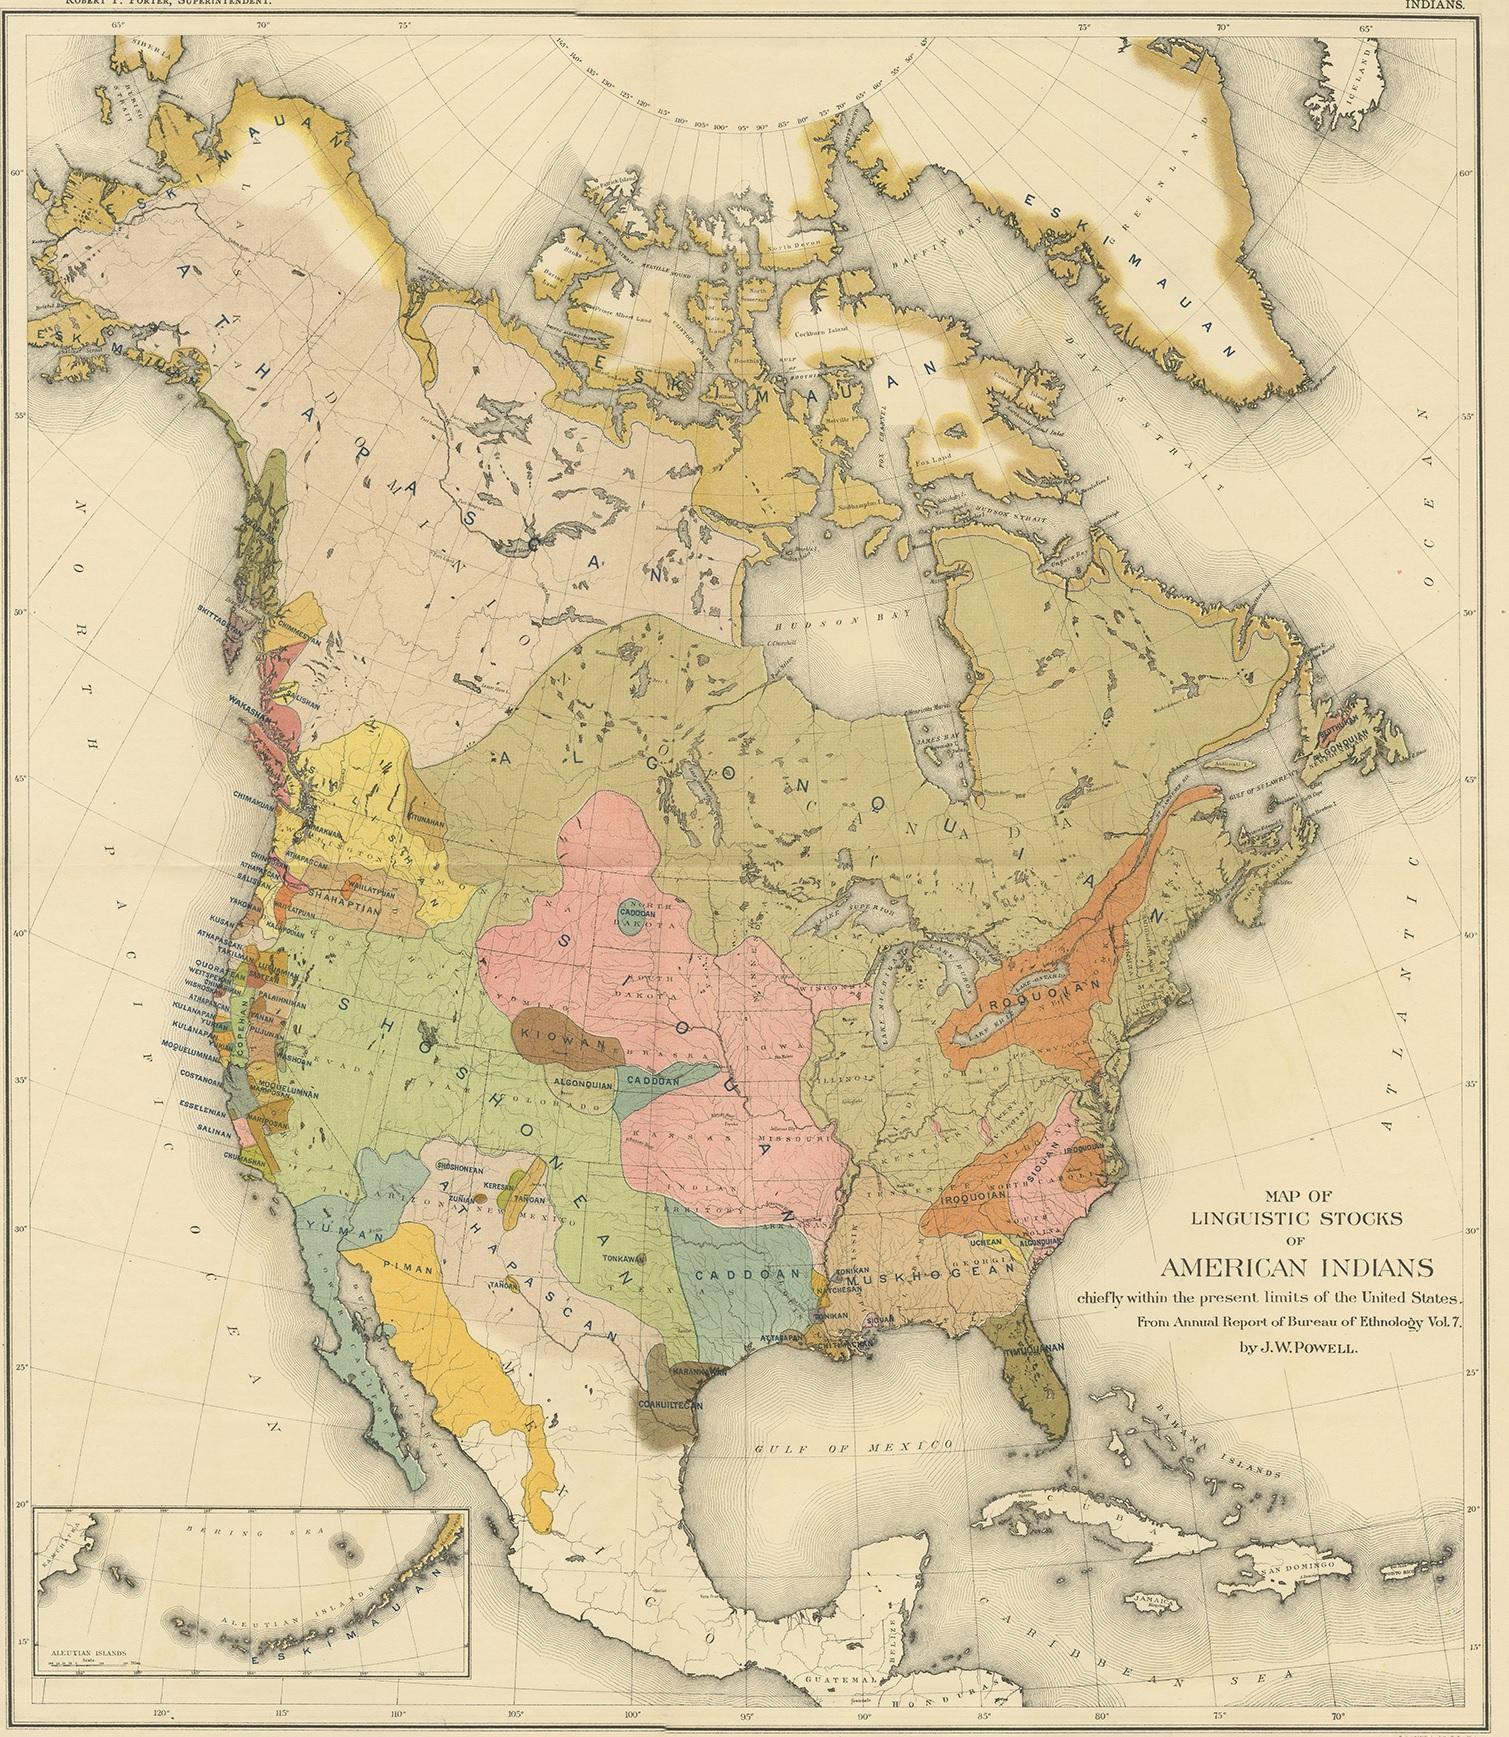 Antique map titled 'Map of Linguistic Stocks of American Indians chiefly within the present limits of the United States. From Annual Report of Bureau of Ethnology Vol. 7 by J.W. Powell'. This wonderful map depicts American Indian language groups.